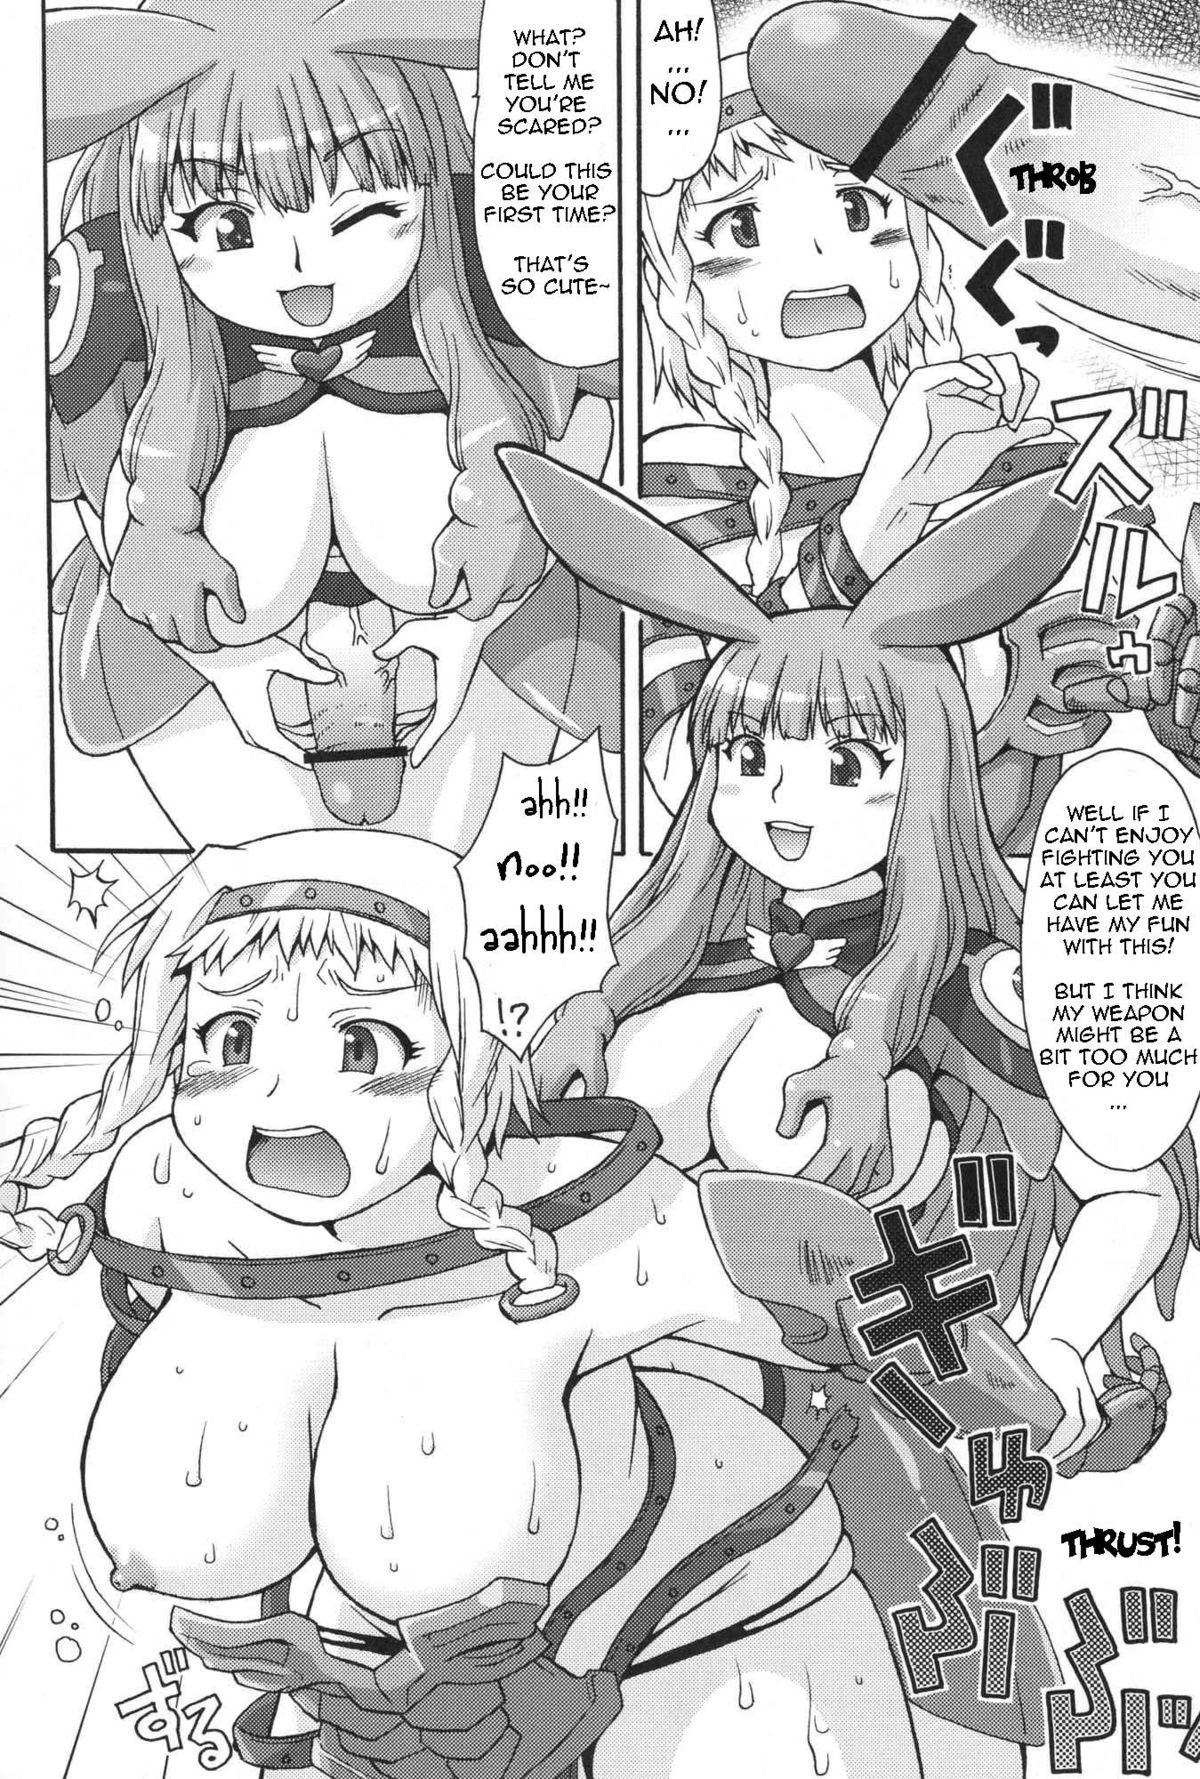 Real Amatuer Porn Mero Rin Queen - Queens blade Adult Toys - Page 3